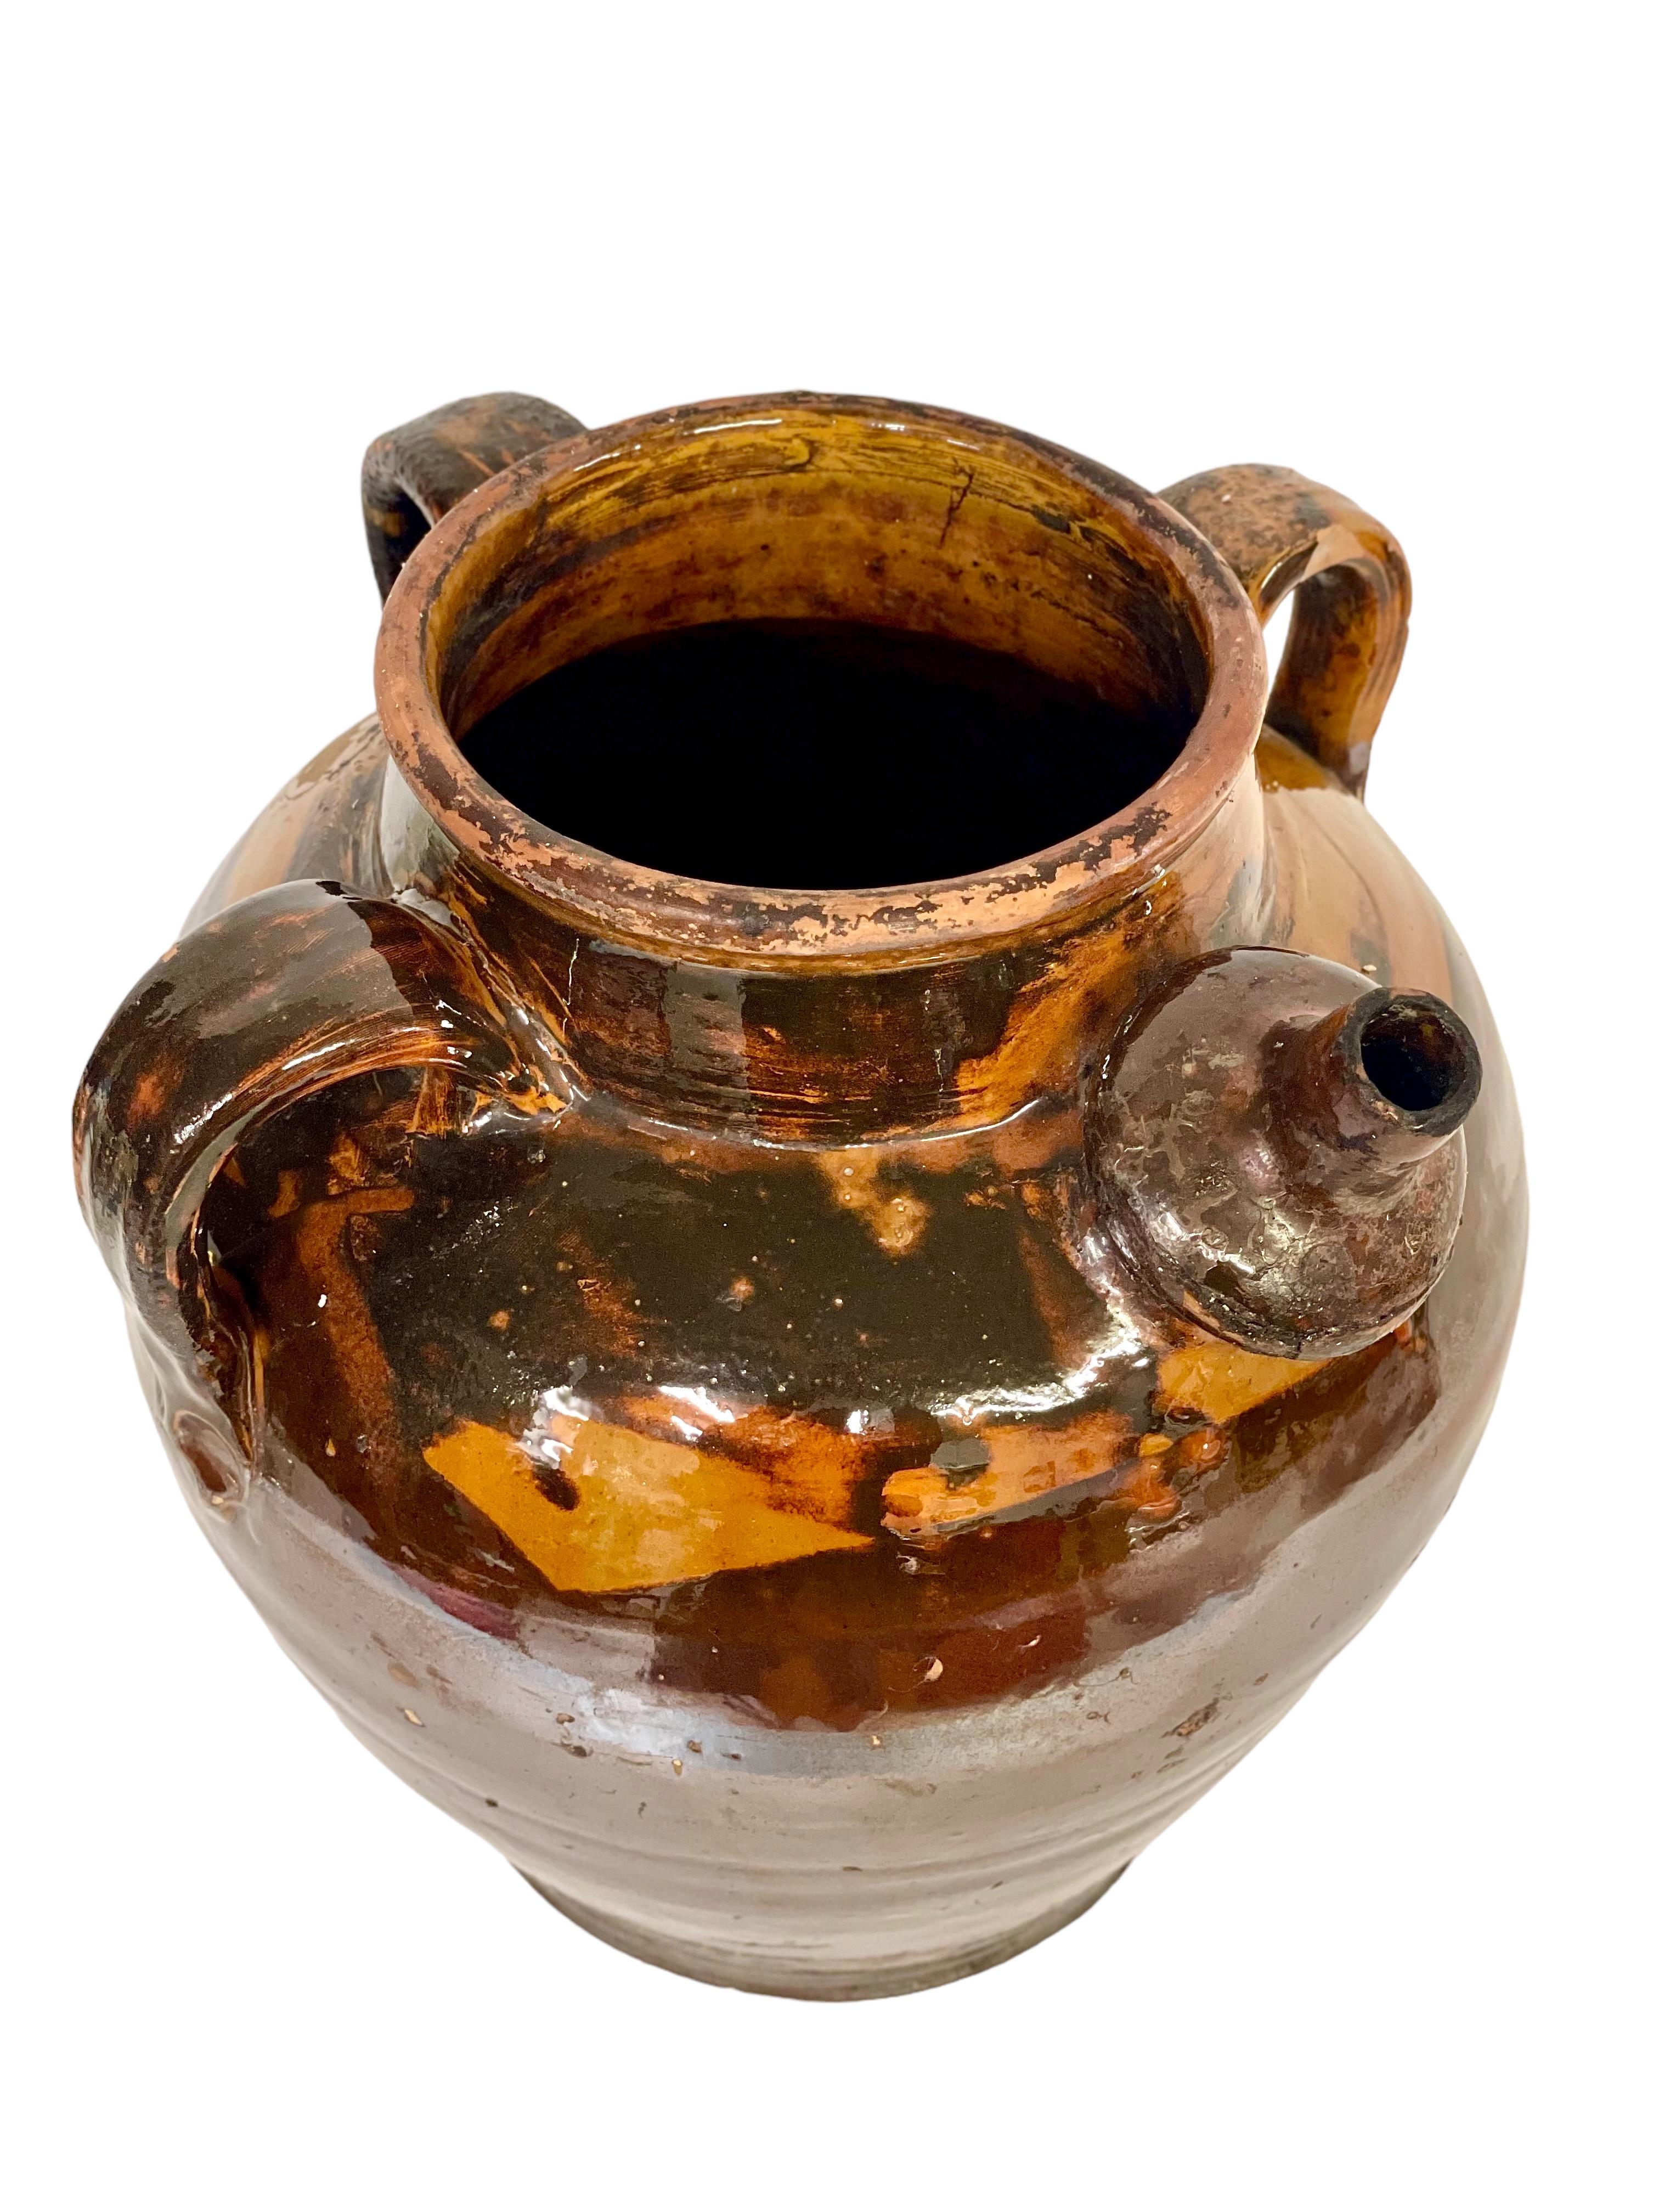 This antique French earthenware jug, with its fabulous rich brown and yellow glaze, dates from the 19th century, and would originally have been used to store nut oils or keep drinking water pleasantly cool. Featuring three handles and a